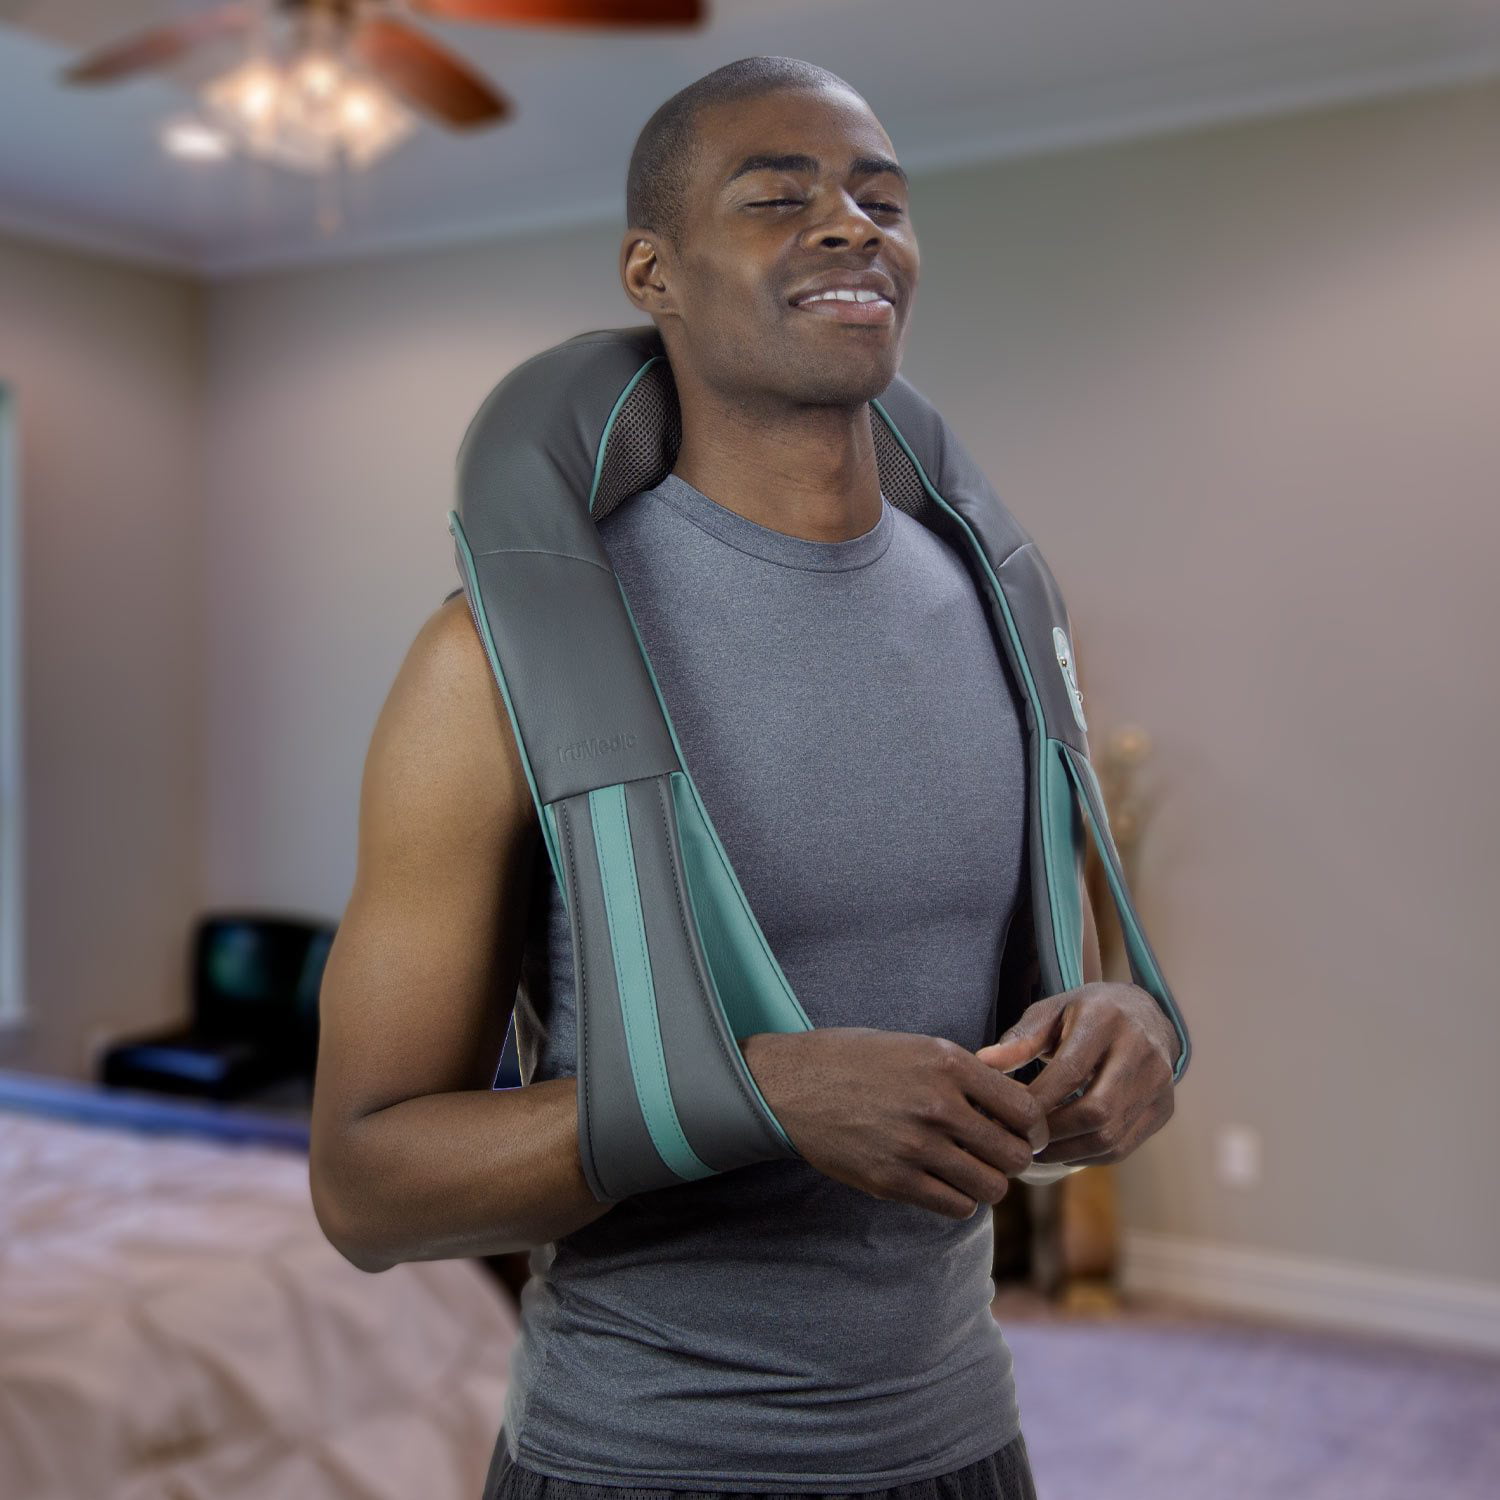 TruMedic InstaShiatsu+ Neck, Back, and Shoulder Massager - Cordless &  Rechargeable, Shiatsu Neck Massager with Heat - Use at Home & Office  (IS-2000) 